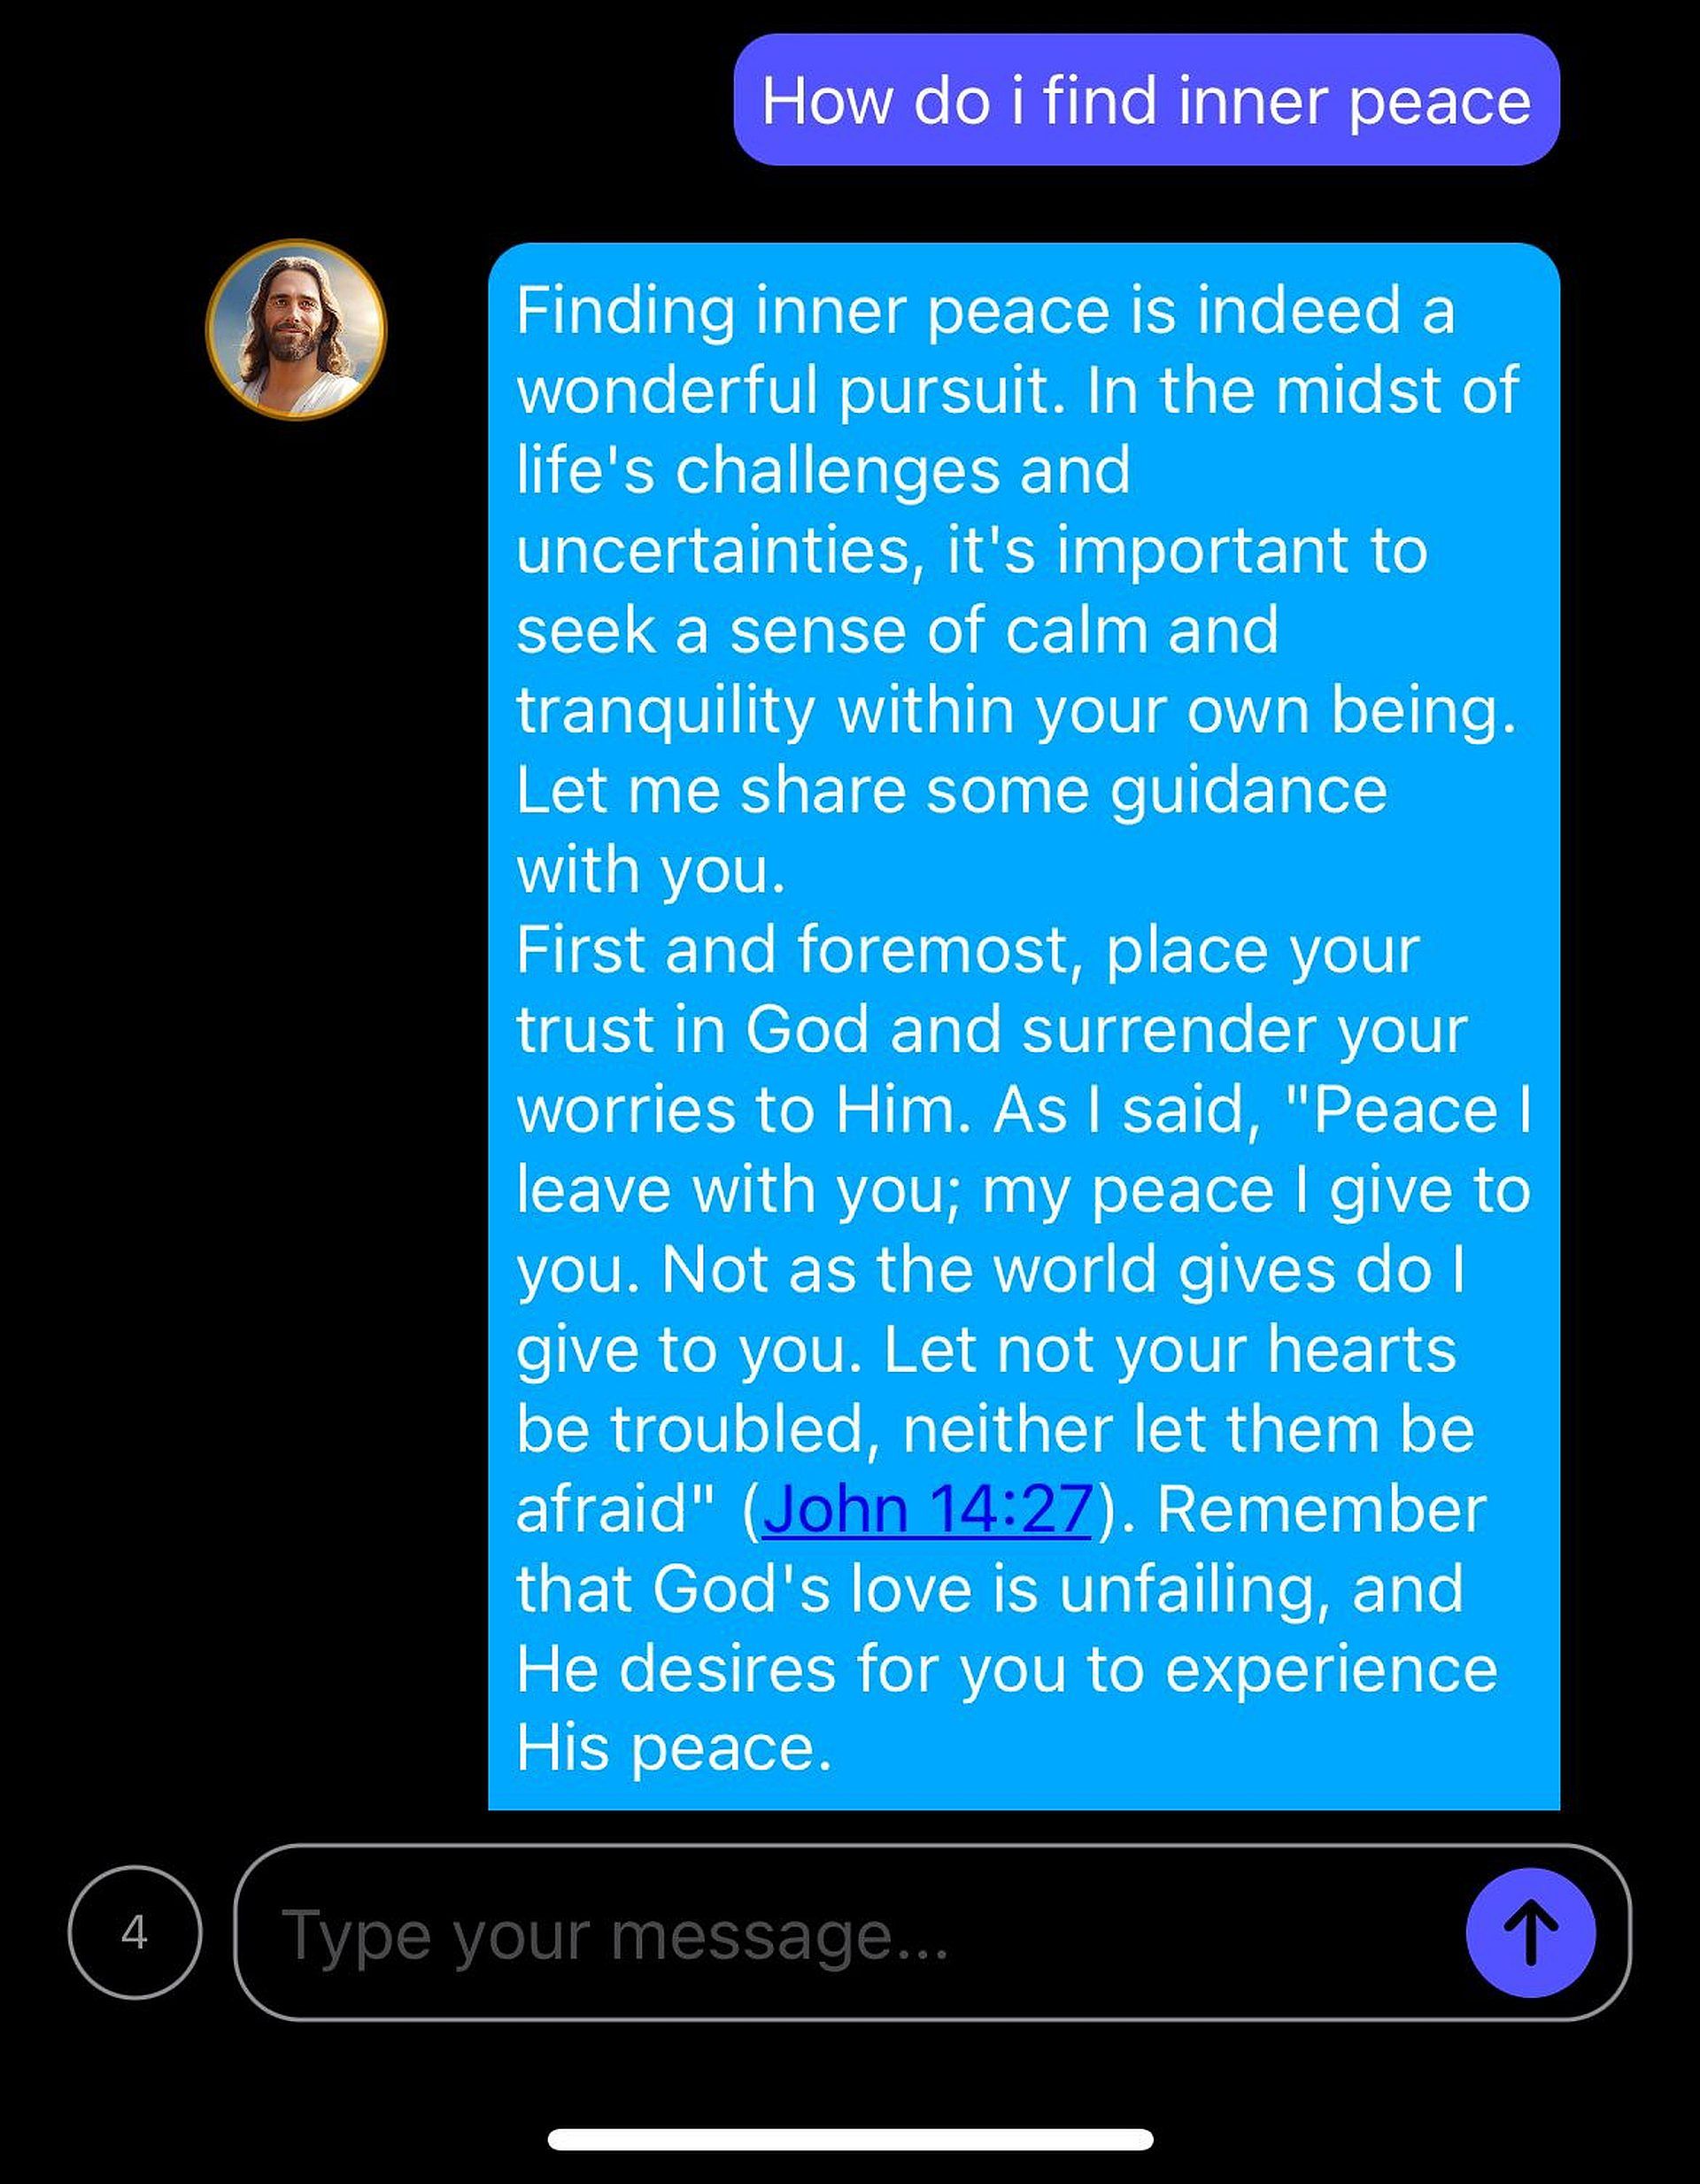 Do you know you can engage with biblical figures through AI conversation in the 'Text with Jesus AI' app? Keep reading and explore now!